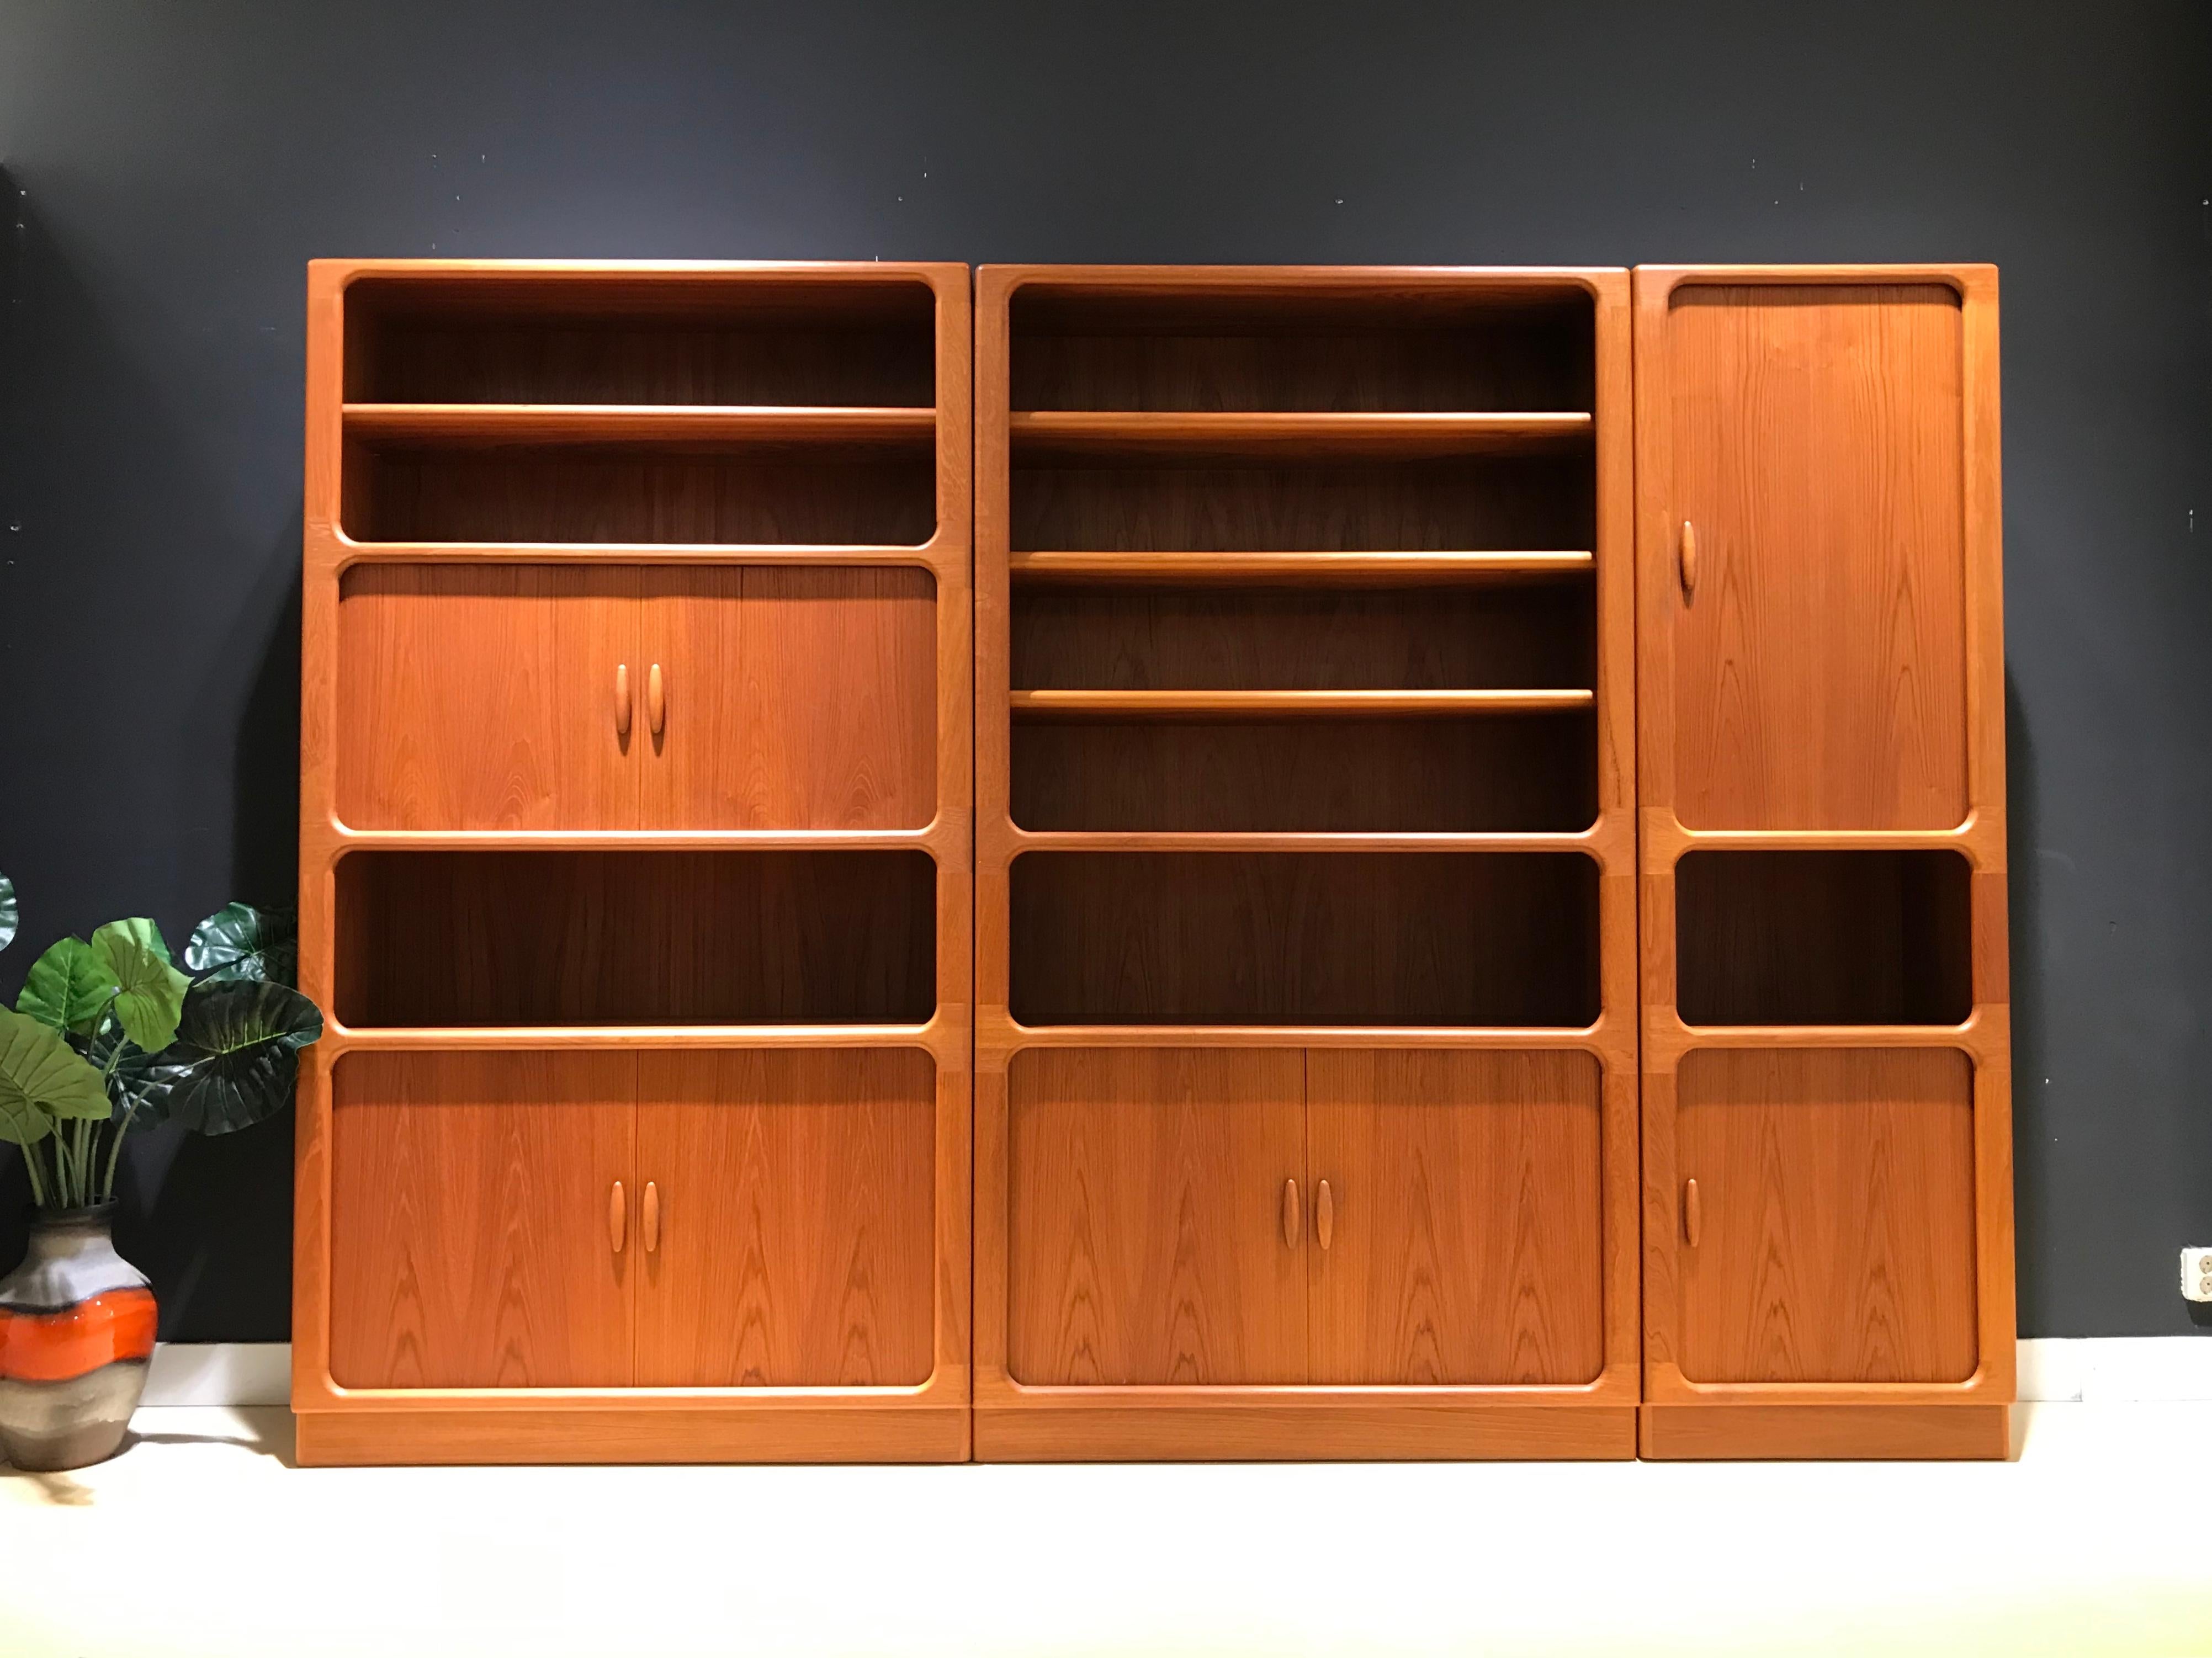 This stunning teak wall unit is made in the 1970s by Dyrlund with only Danish cabinetmaking techniques and hand finishing. Dyrlund's midcentury furniture is prized for its exceptional craftmanship and timeless, Minimalist aesthetic, but also for